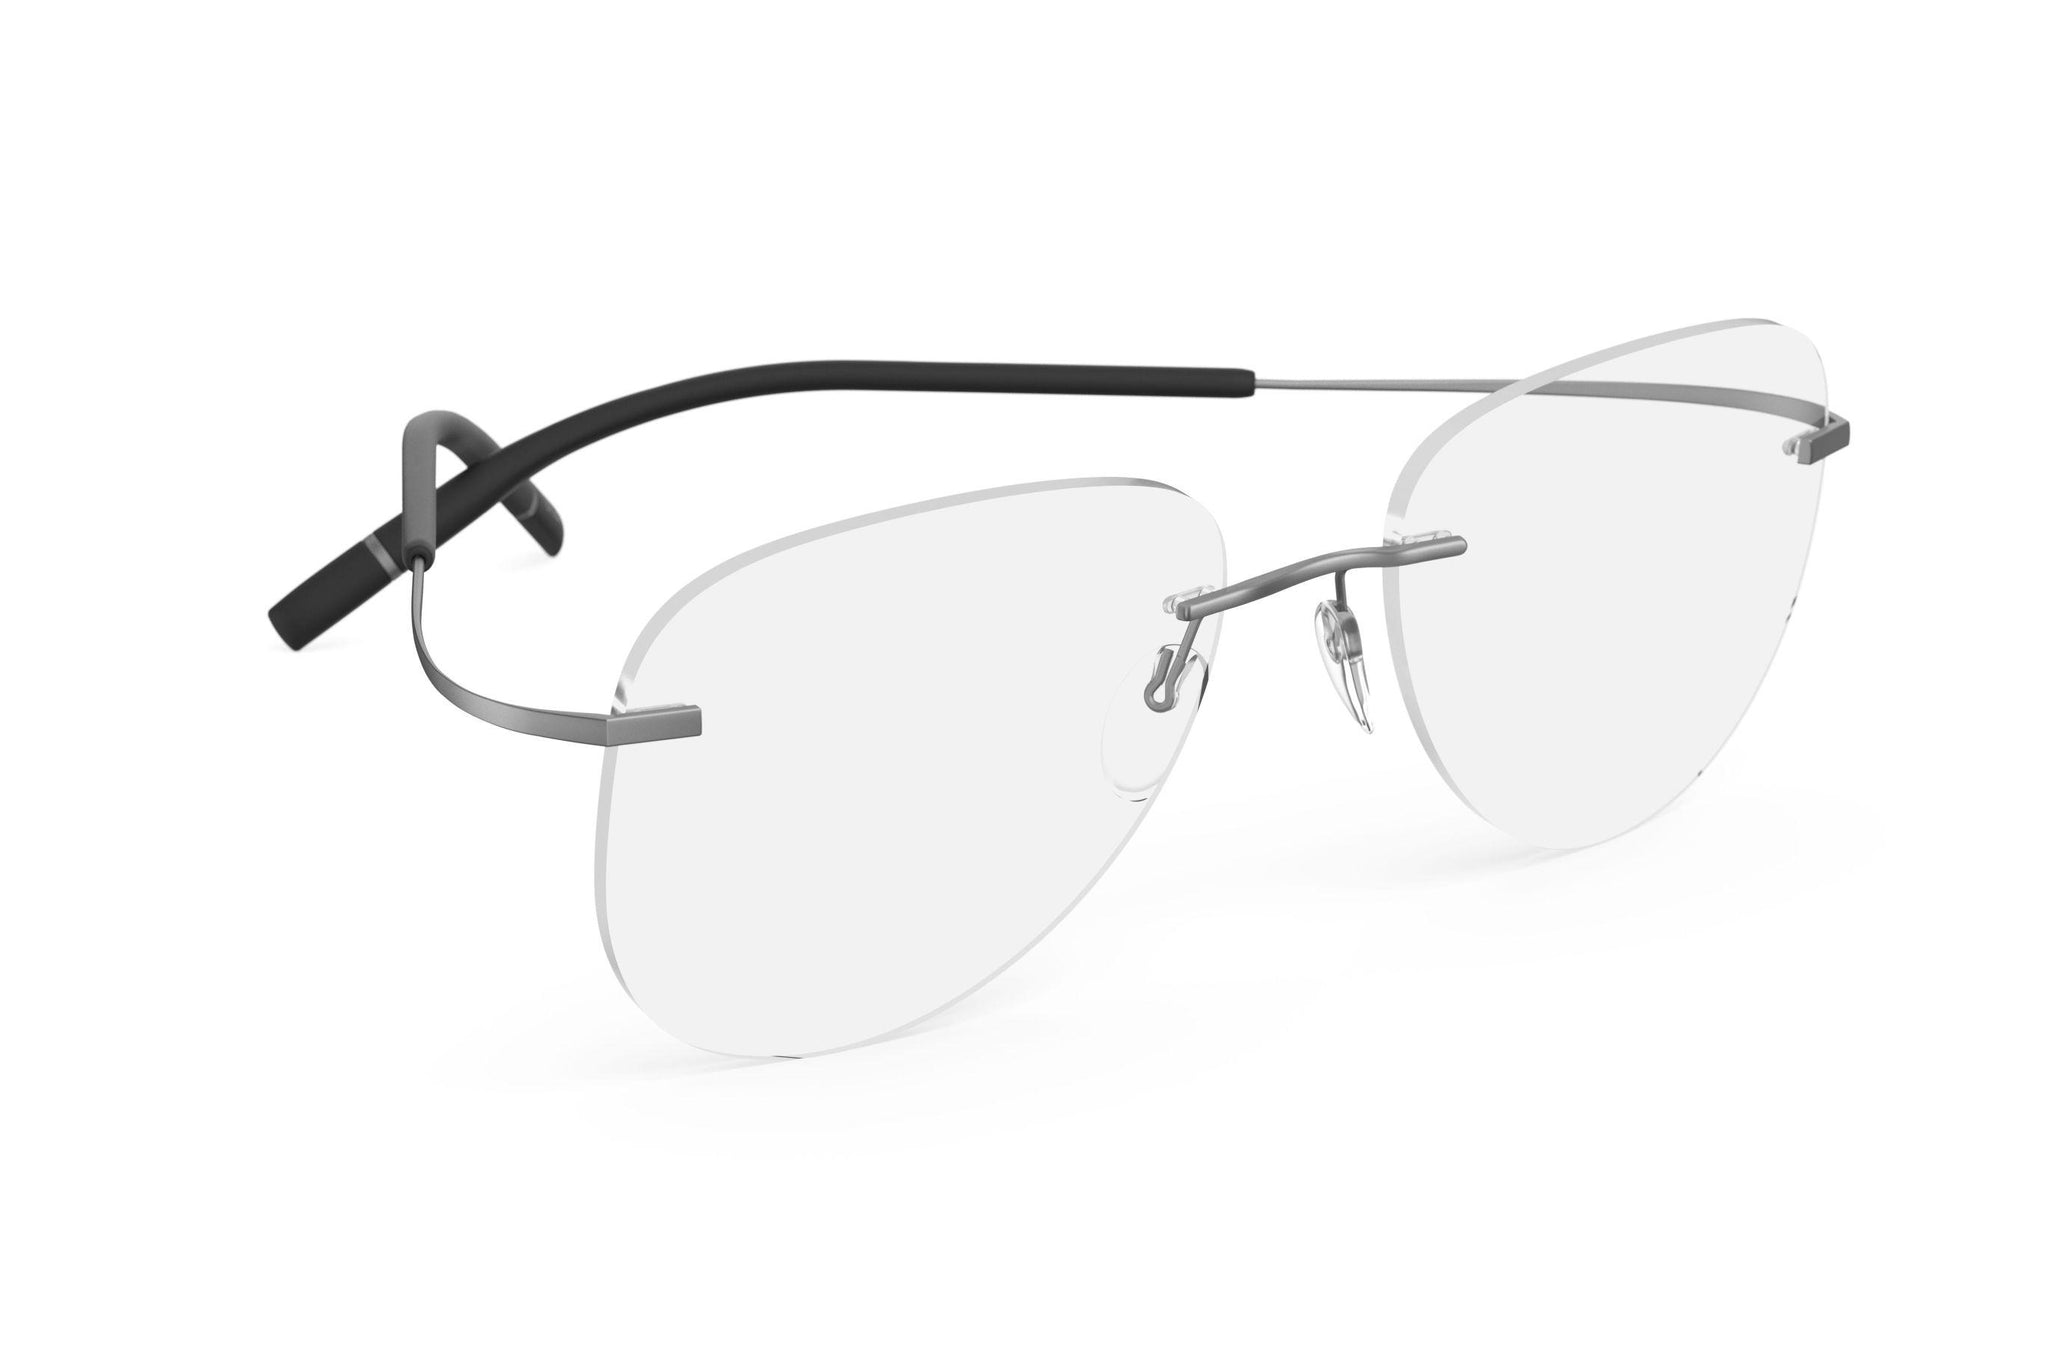 Buy Silhouette, Tma Icon / Aviator, unisex sunglasses online at a great  price